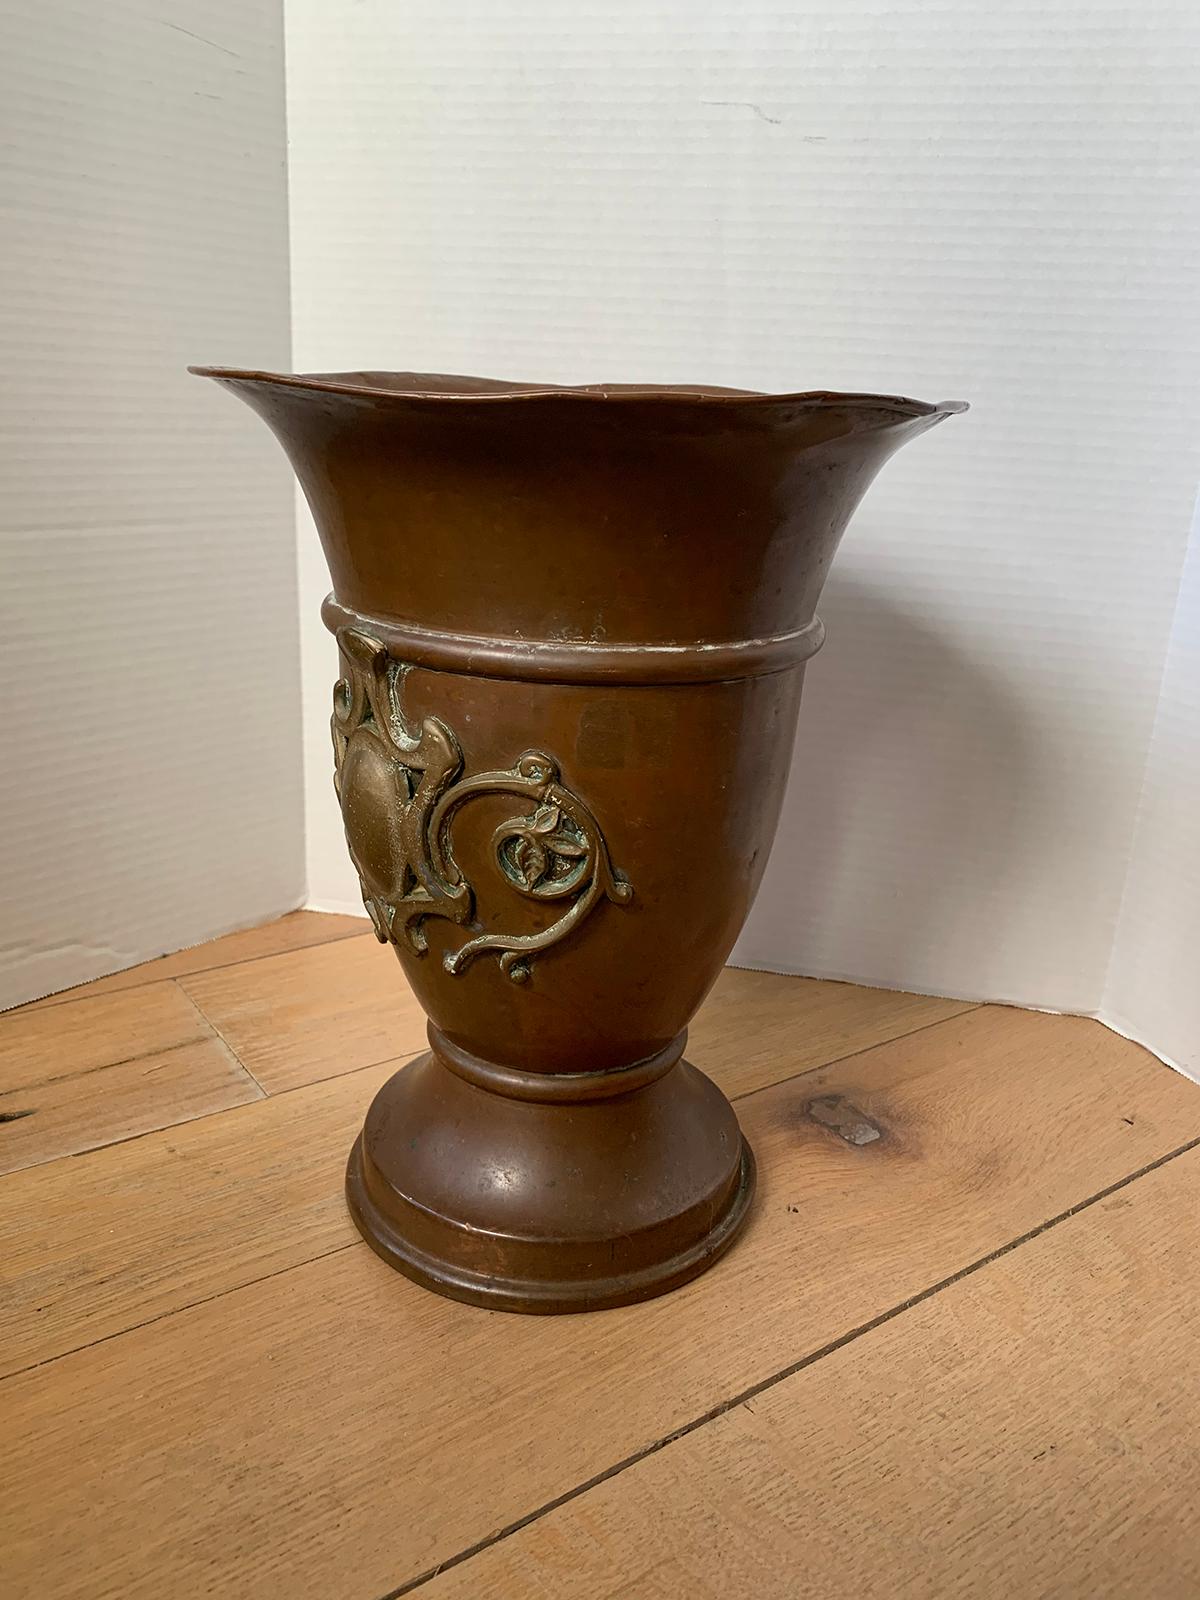 Late 19th Century Copper Cachepot with Crest by Joseph Heinrichs, Marked 1